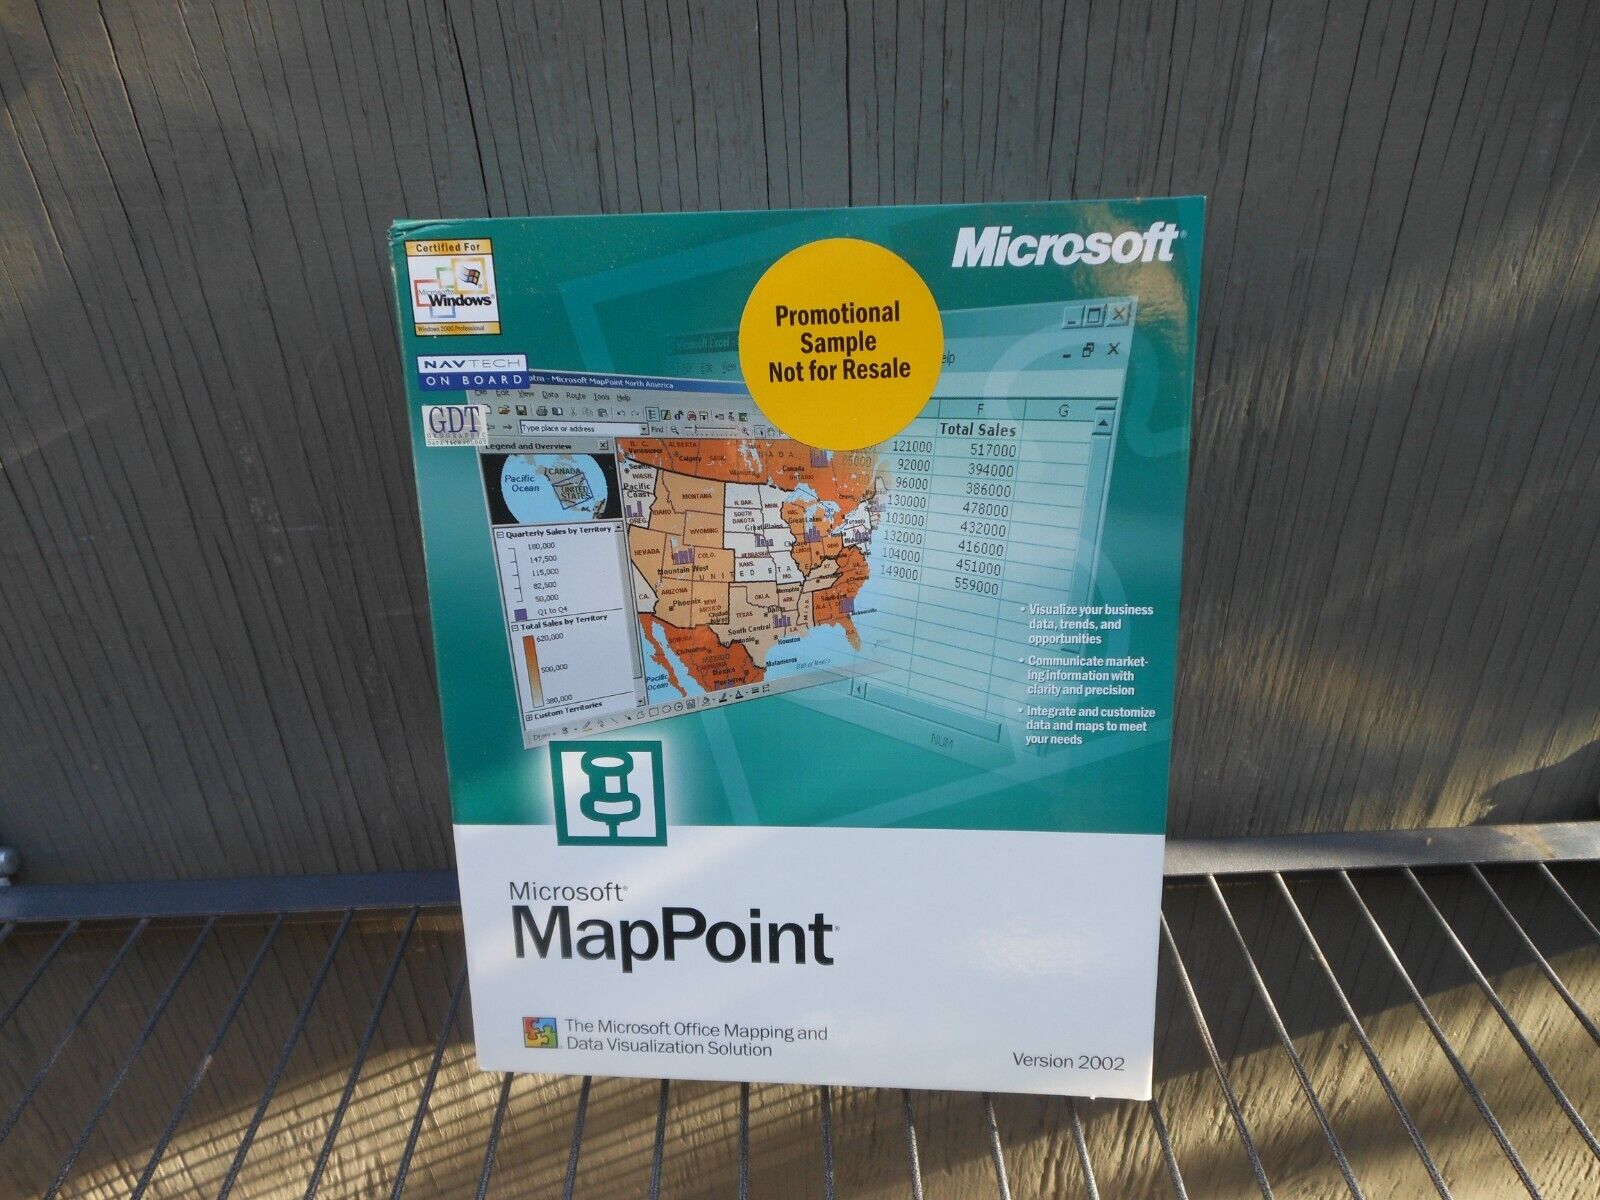 Microsoft MapPoint Version 2002 Promotional Sample (Sealed NEW) 13C